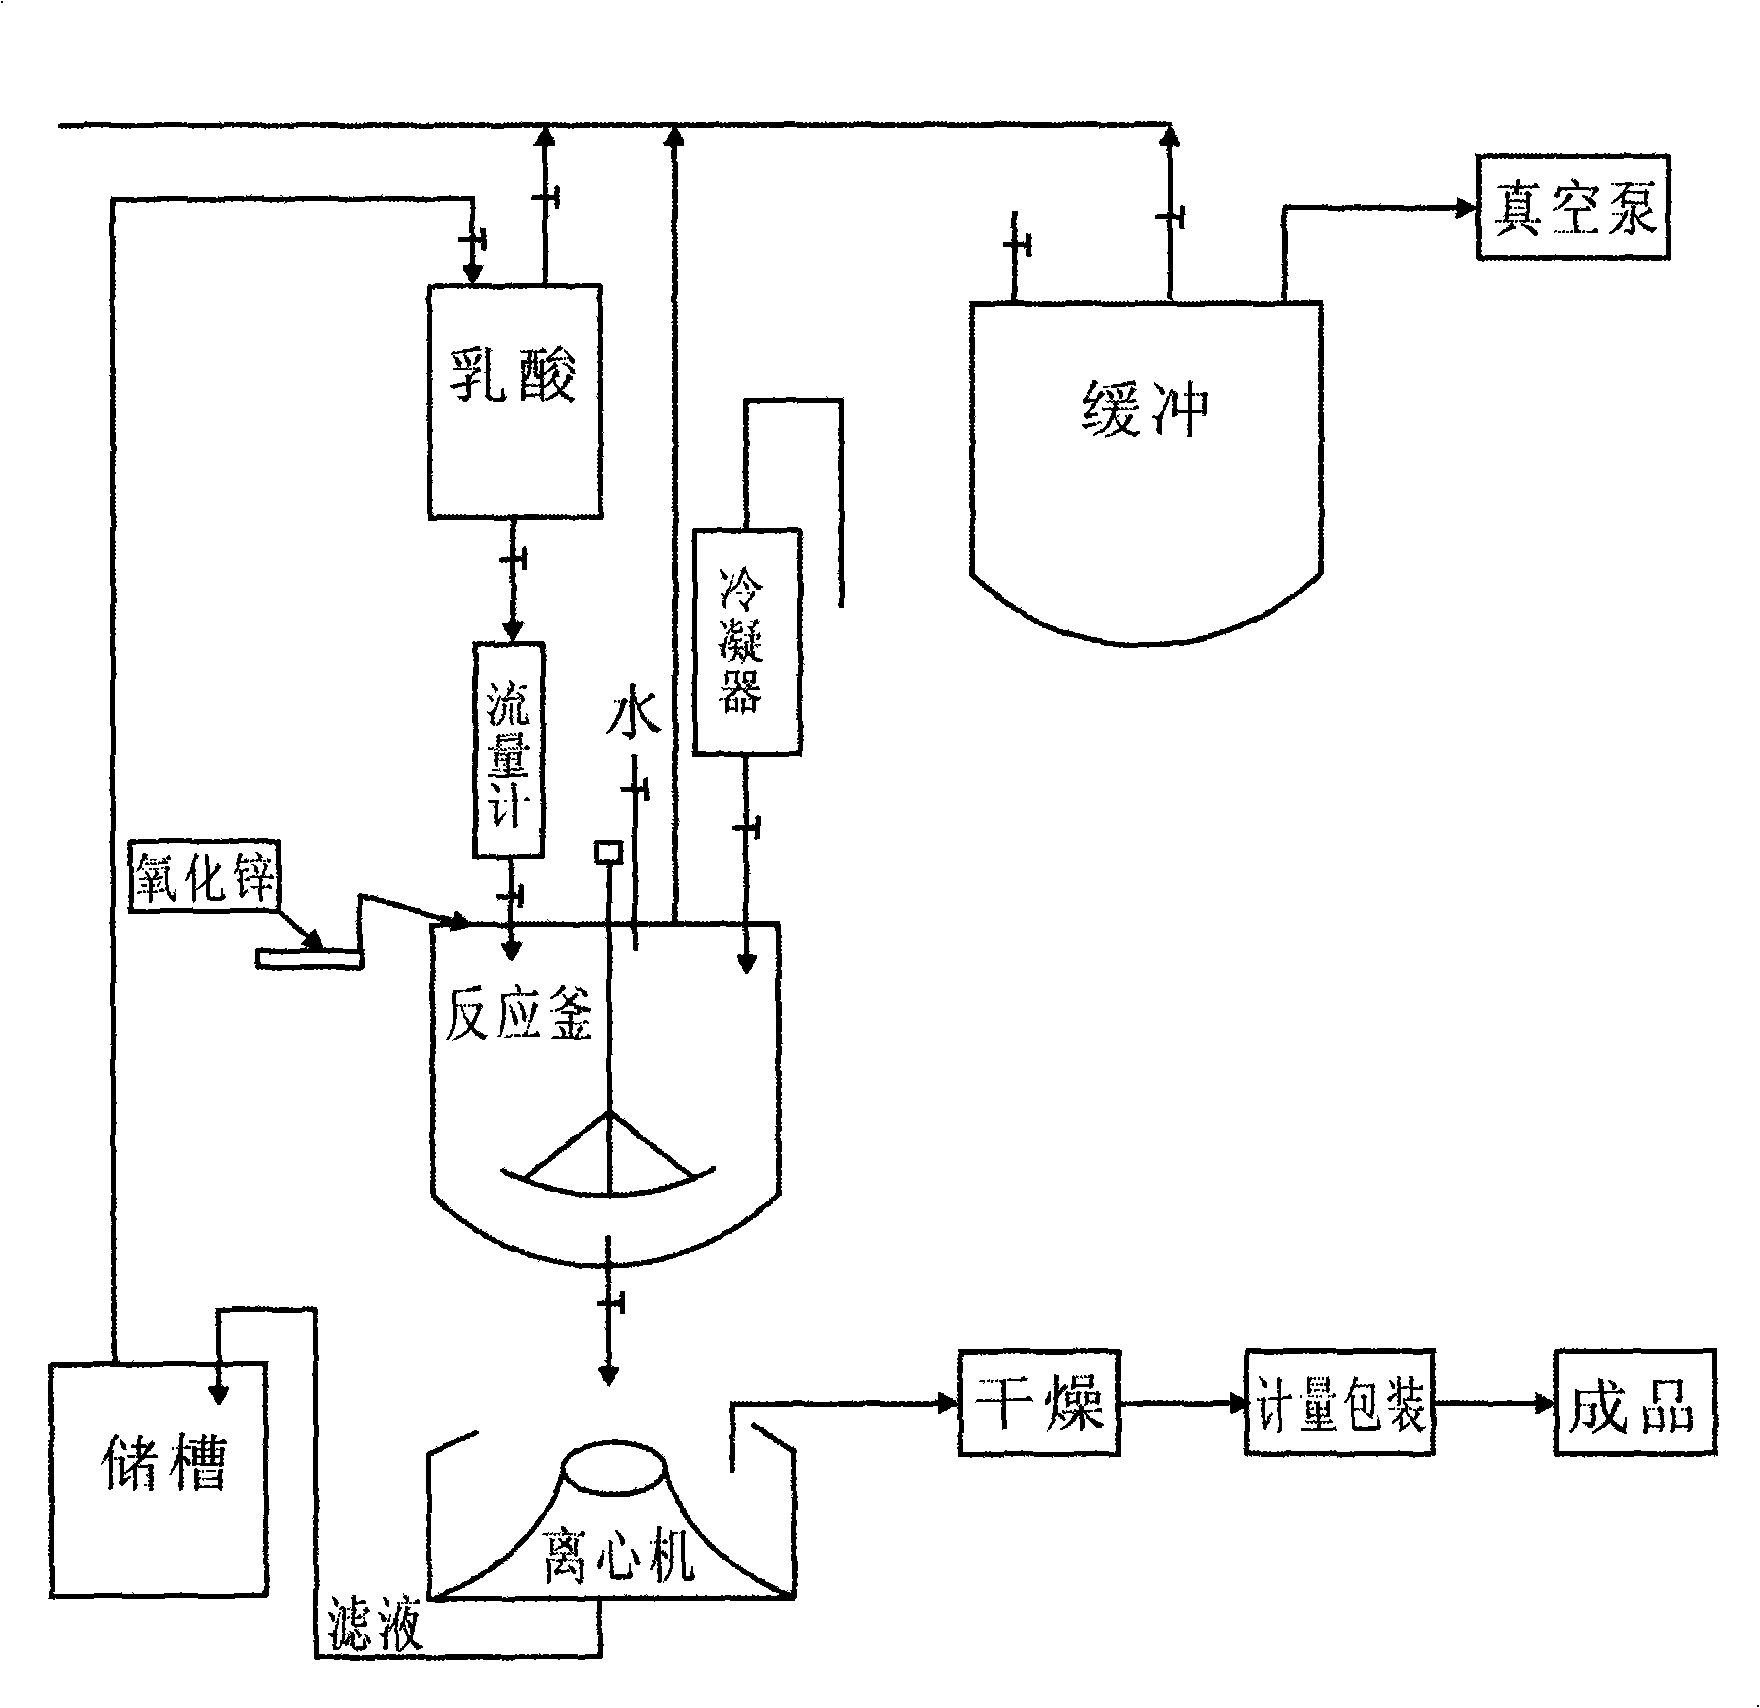 Process for producing feed-grade zinc lactate